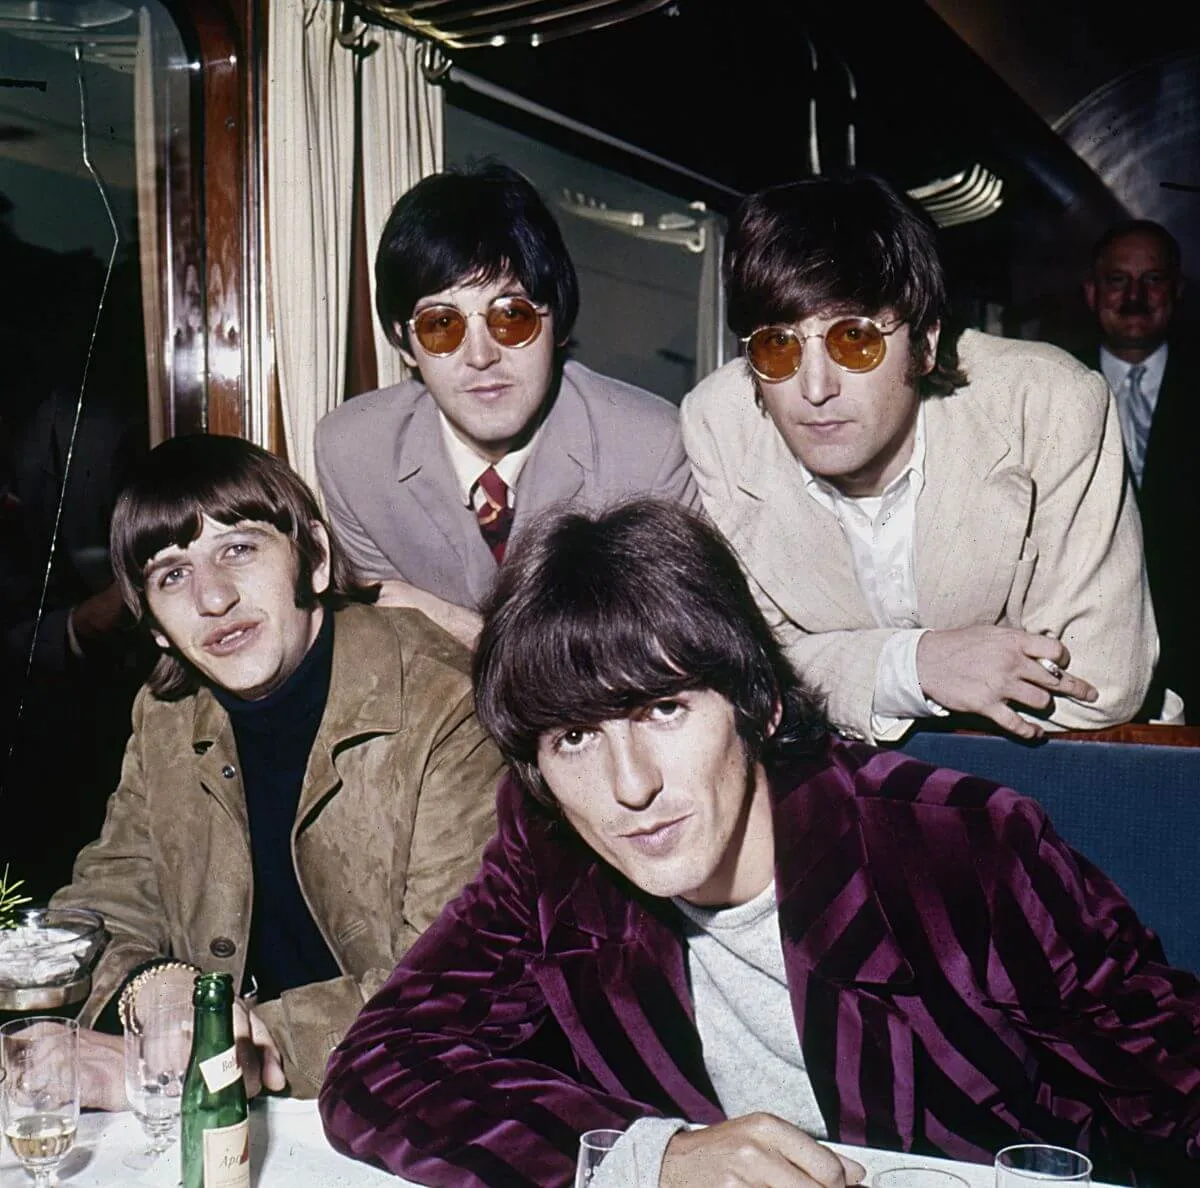 George Harrison, Ringo Starr, Paul McCartney, and John Lennon lean over a table. McCartney and Lennon wear circular, red-tinted glasses.